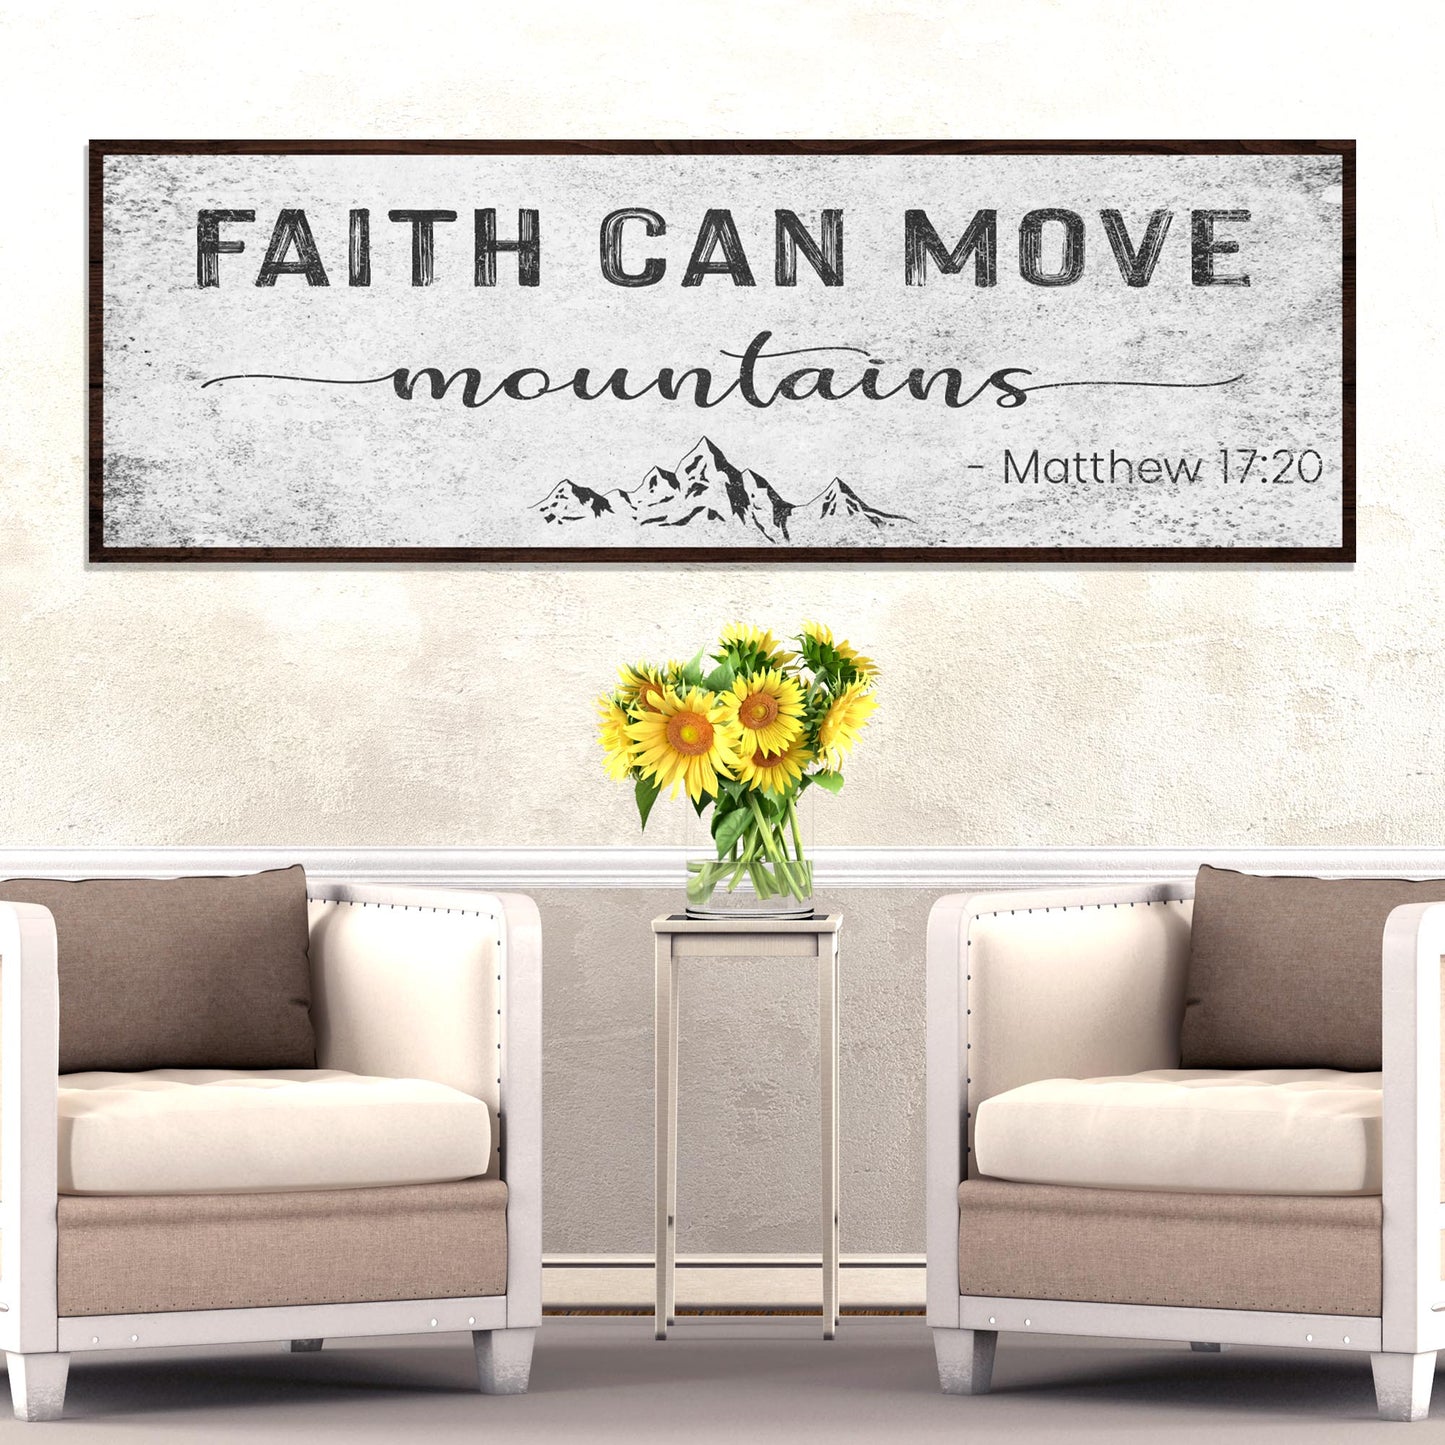 Matthew 17:20 - Faith Can Move Mountains Sign - Image by Tailored Canvases